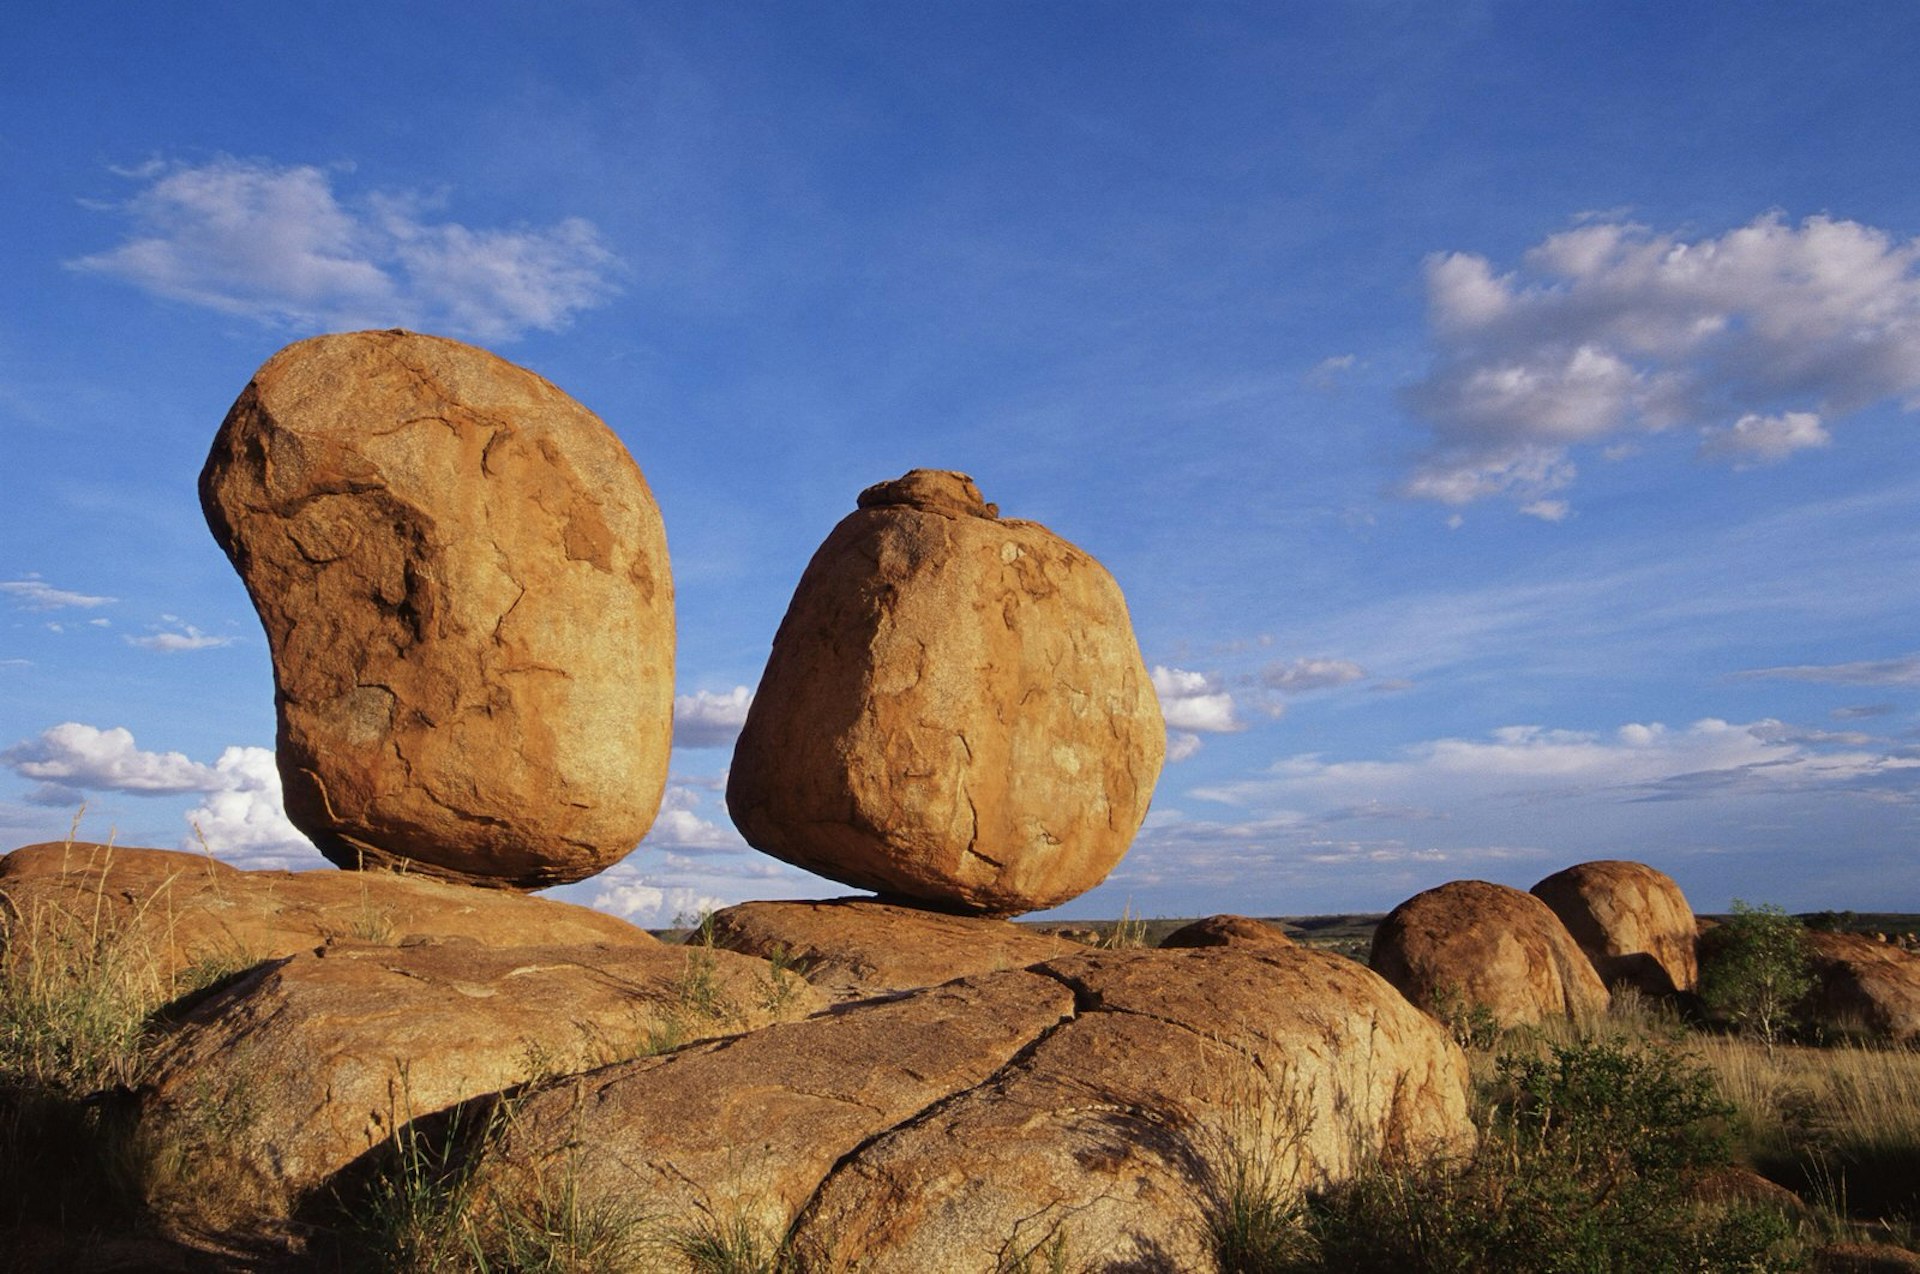 Two of the Devils Marbles balanced on a rocky ledge in the Australian outback © James Hager / robertharding / Getty Images